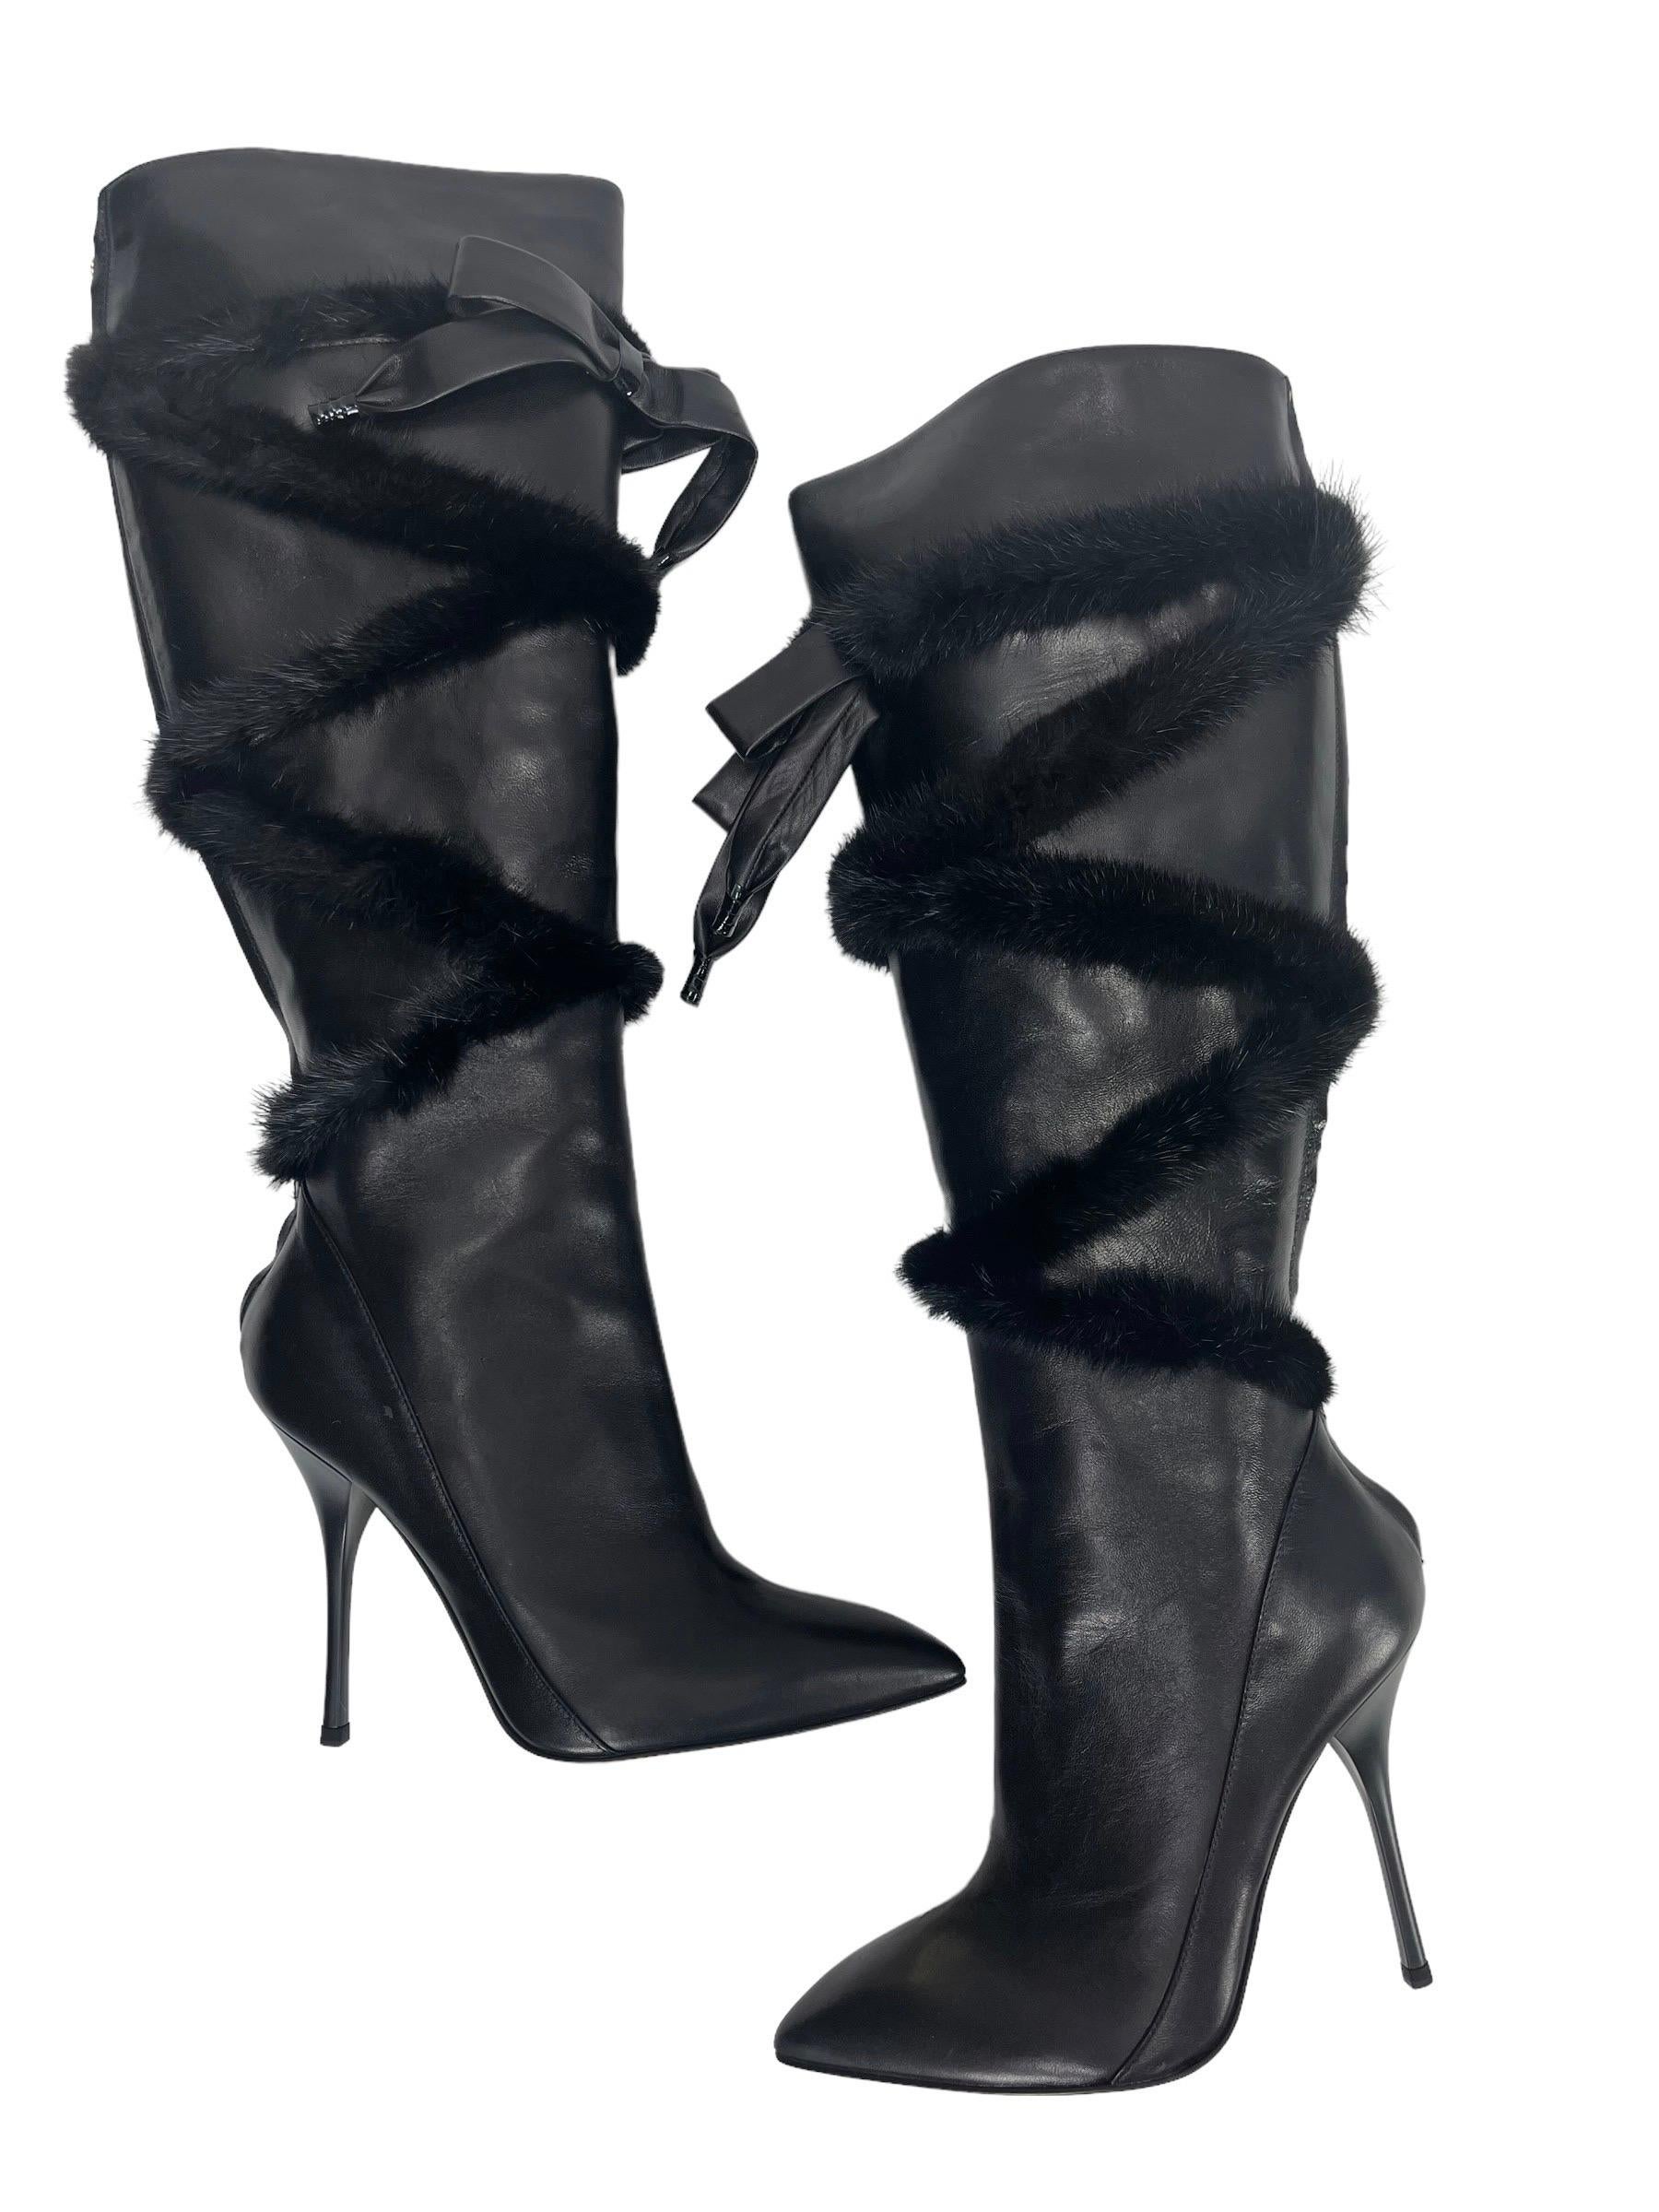 Women's New Roberto Cavalli Black Leather Knee High Boots with Mink Fur It. 37 - US 7 For Sale